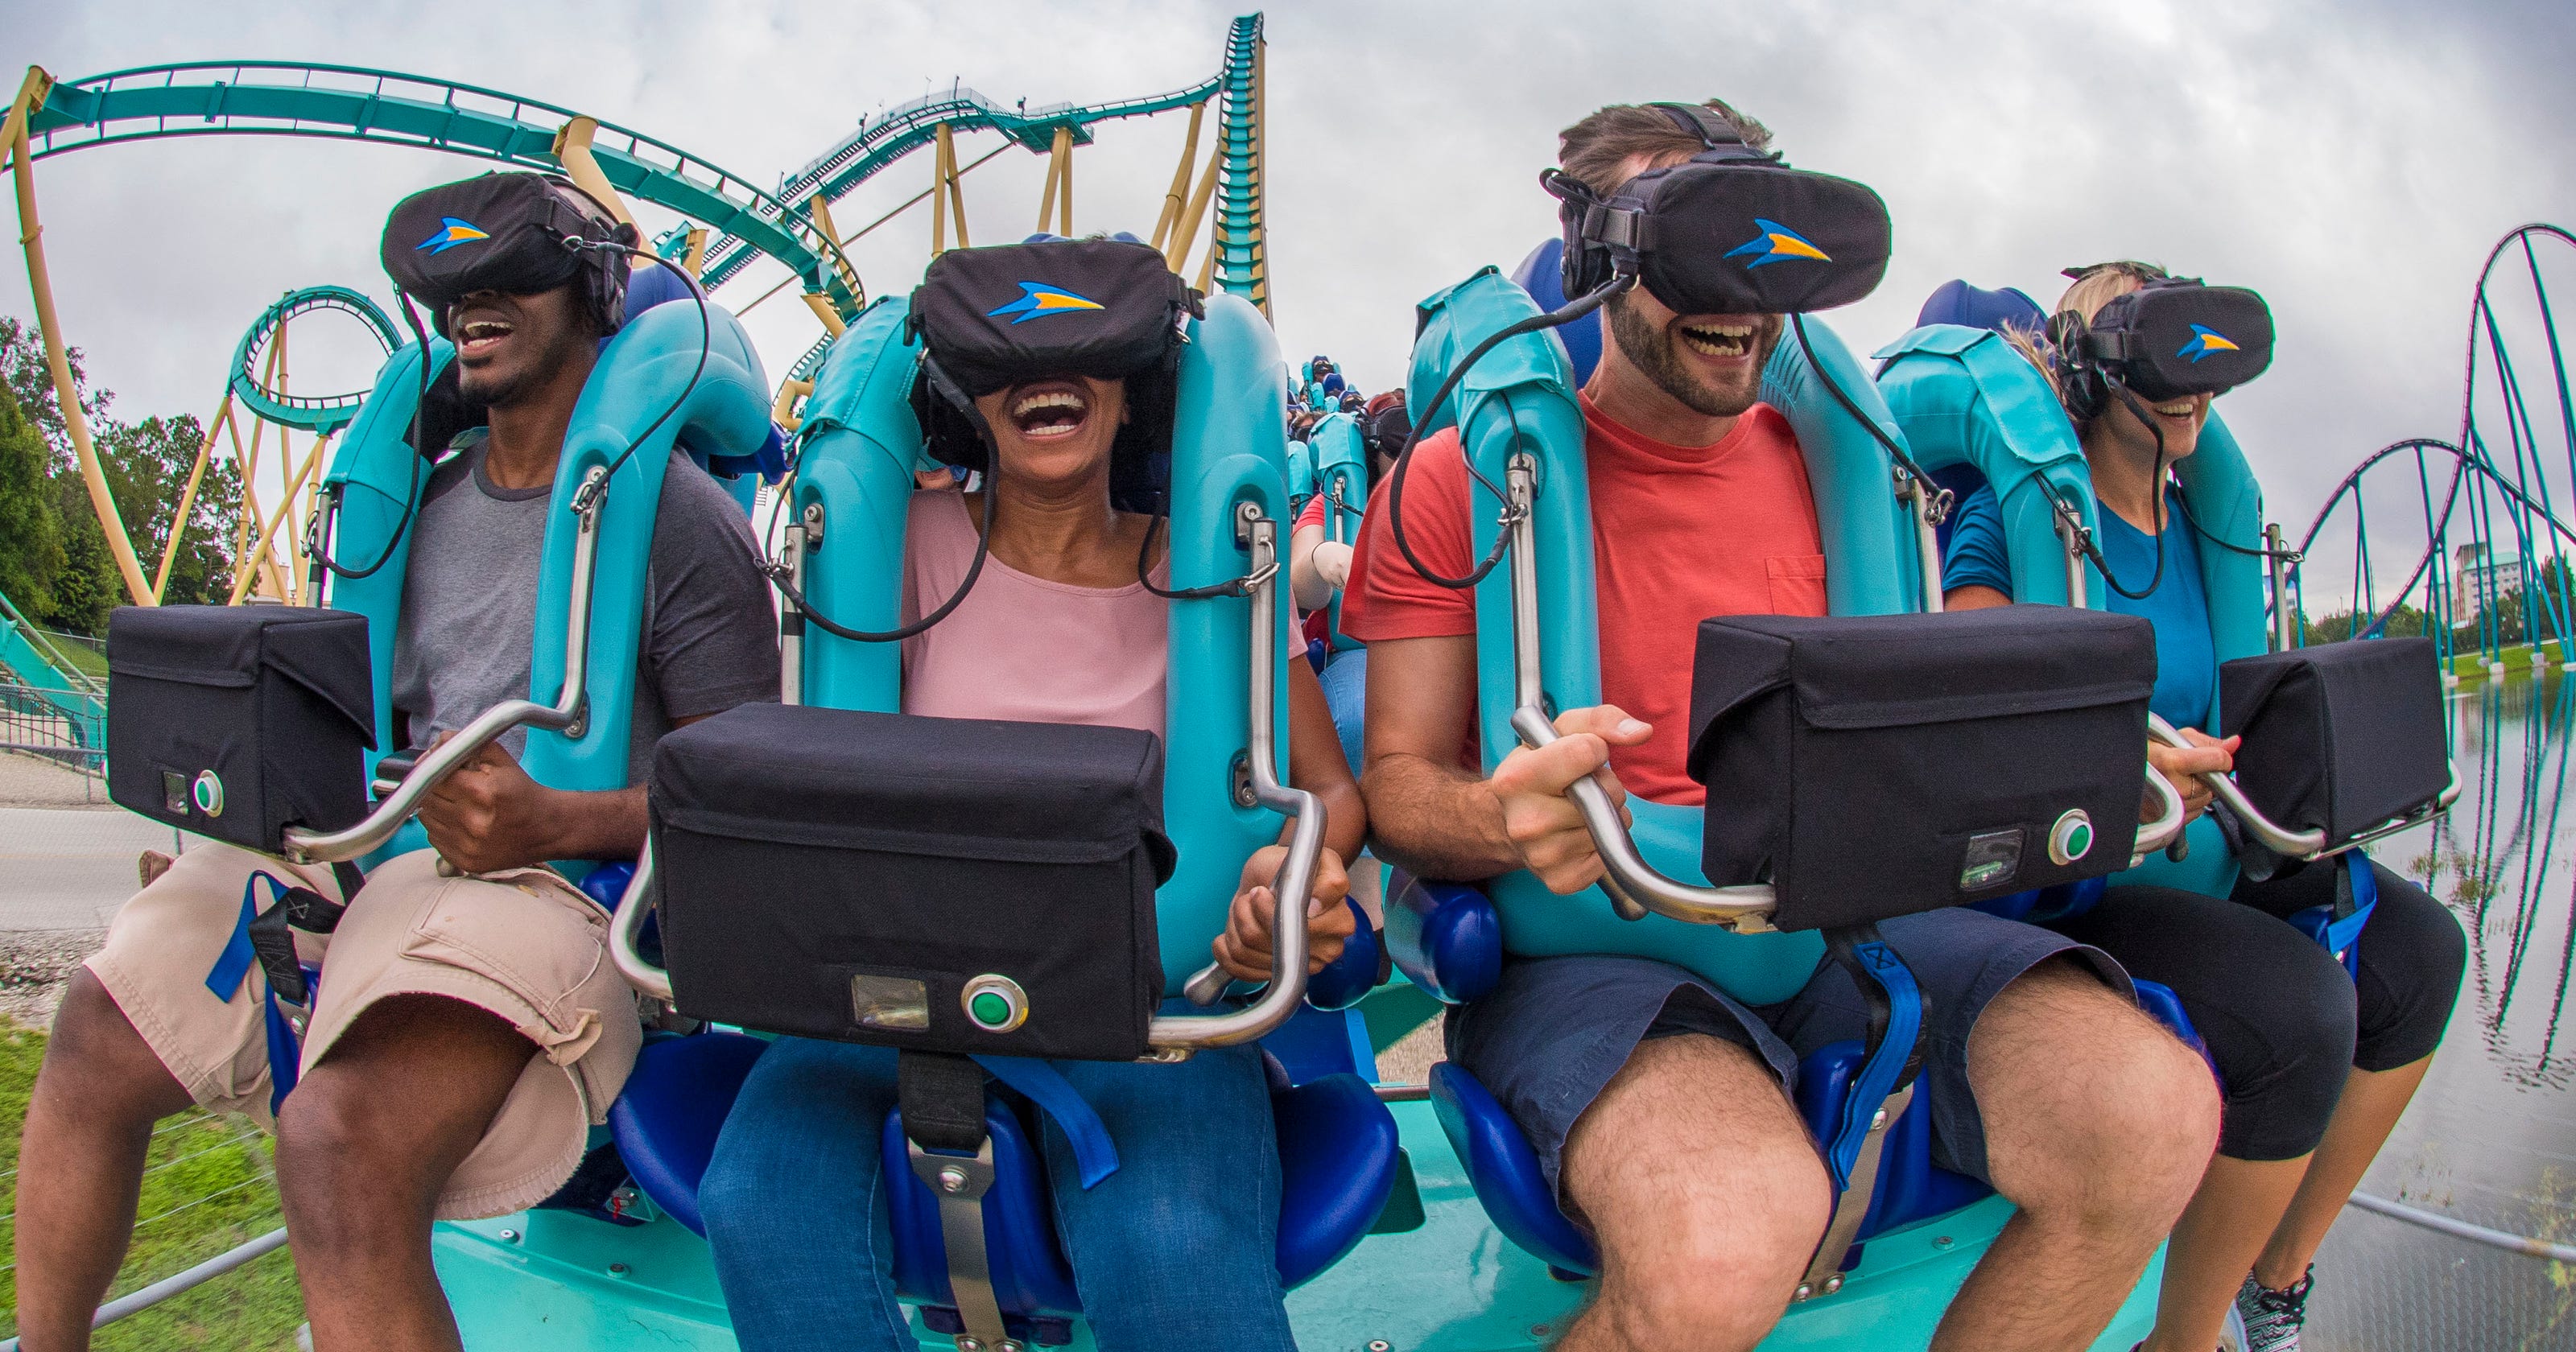 Virtual Reality Vr Tech Added To Theme Park Attractions 1705